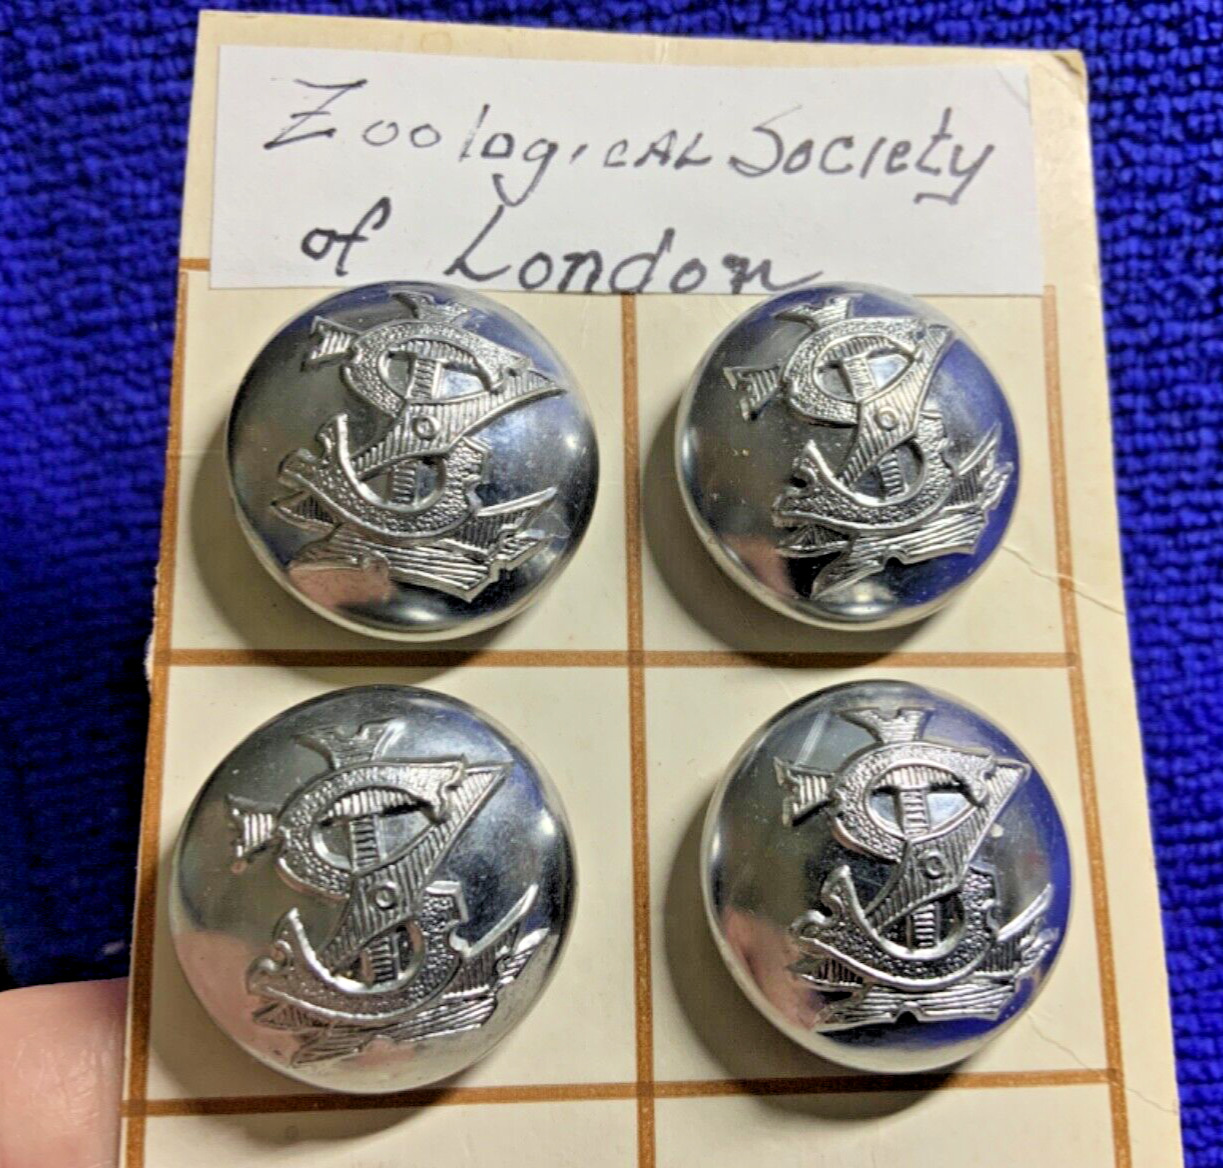 ZSL VINTAGE ZOOLOGICAL SOCIETY OF LONDON ZOOKEEPER UNIFORM BUTTON 23mm 20thC NOS